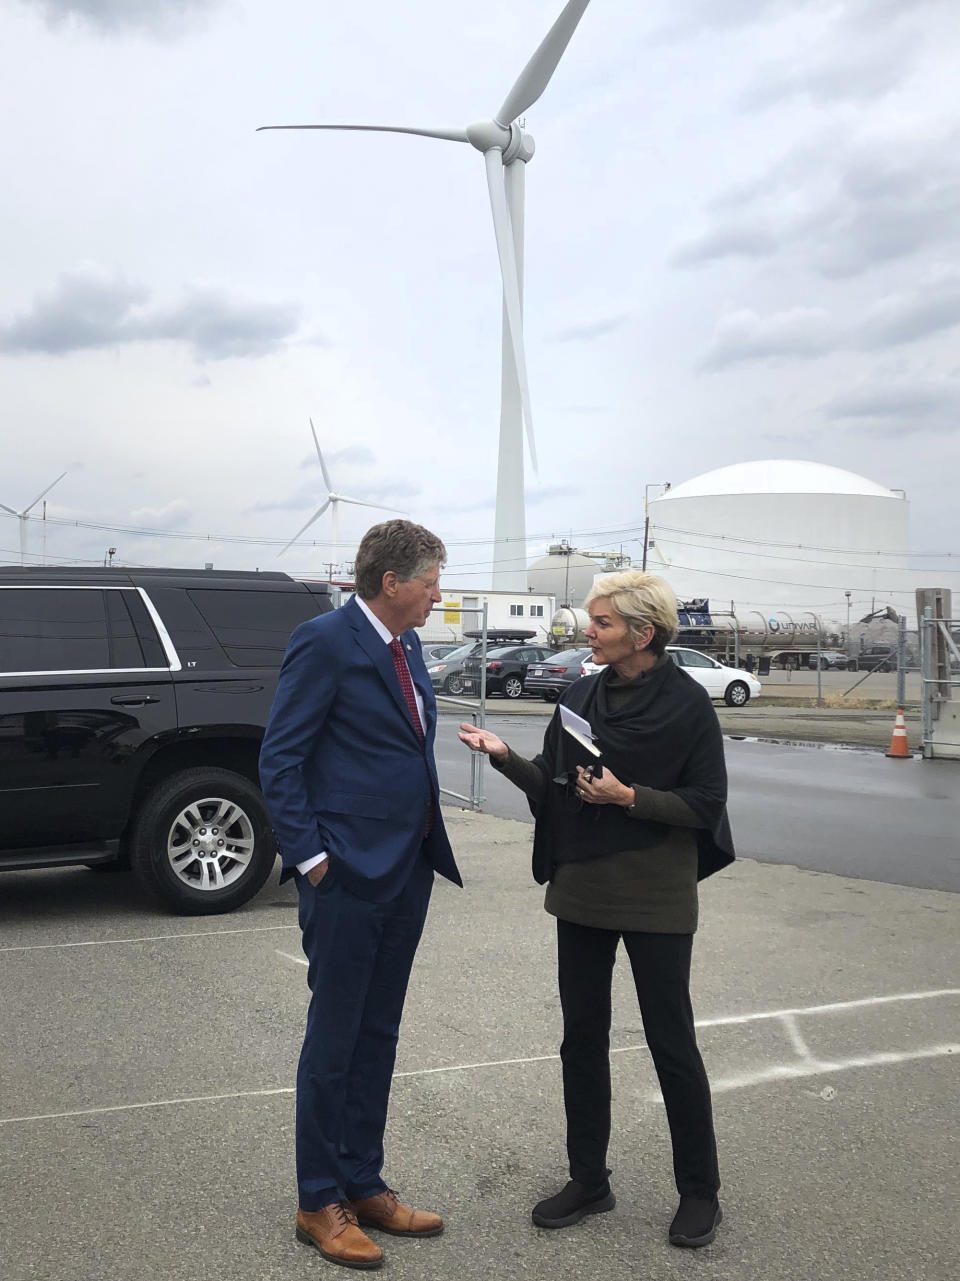 U.S. Energy Secretary Jennifer Granholm, right, speaks with Rhode Island Gov. Dan McKee, Thursday Dec. 2, 2021, while visiting an under construction fabrication and assembly facility for offshore wind turbines at the Port of Providence, in Providence, R.I. The building is scheduled to be finished this spring to support two offshore wind projects, Revolution Wind and South Fork Wind. (AP Photo/Jennifer McDermott)